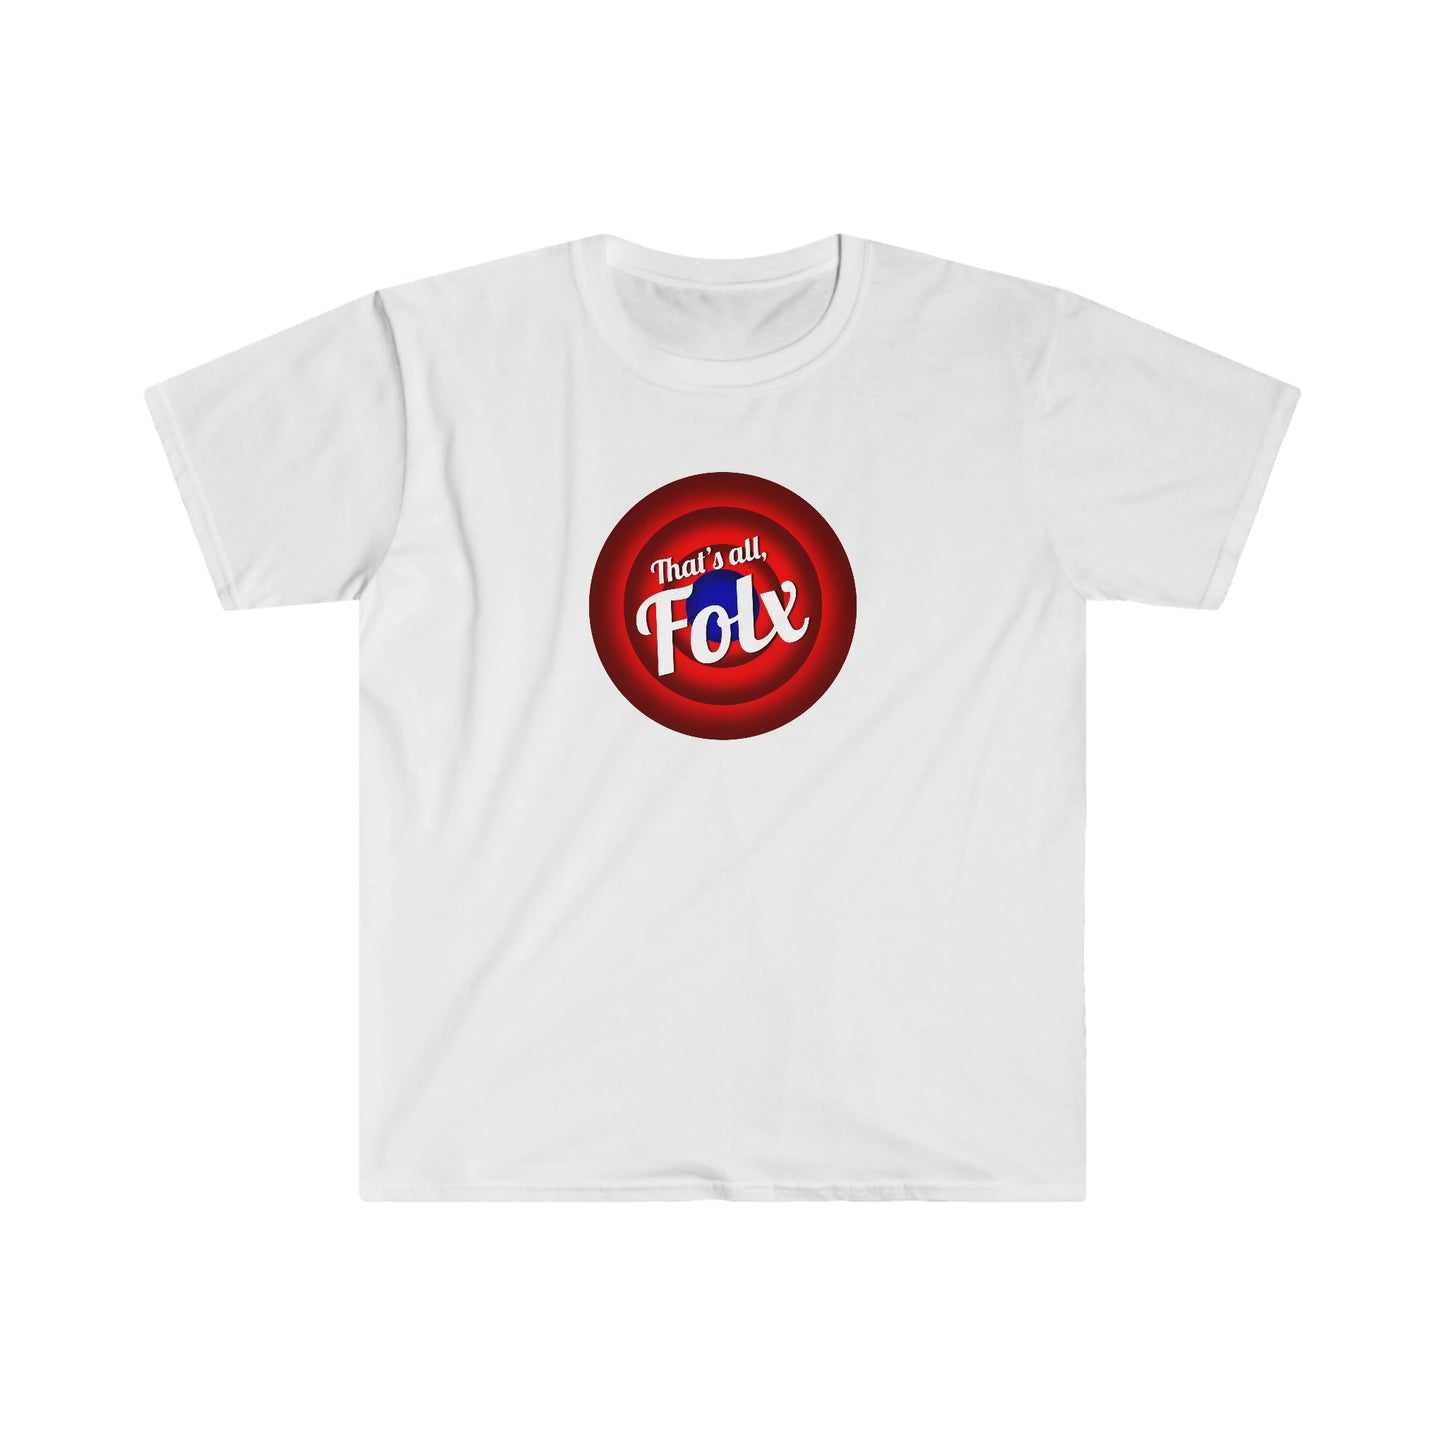 That's All Folx Tee